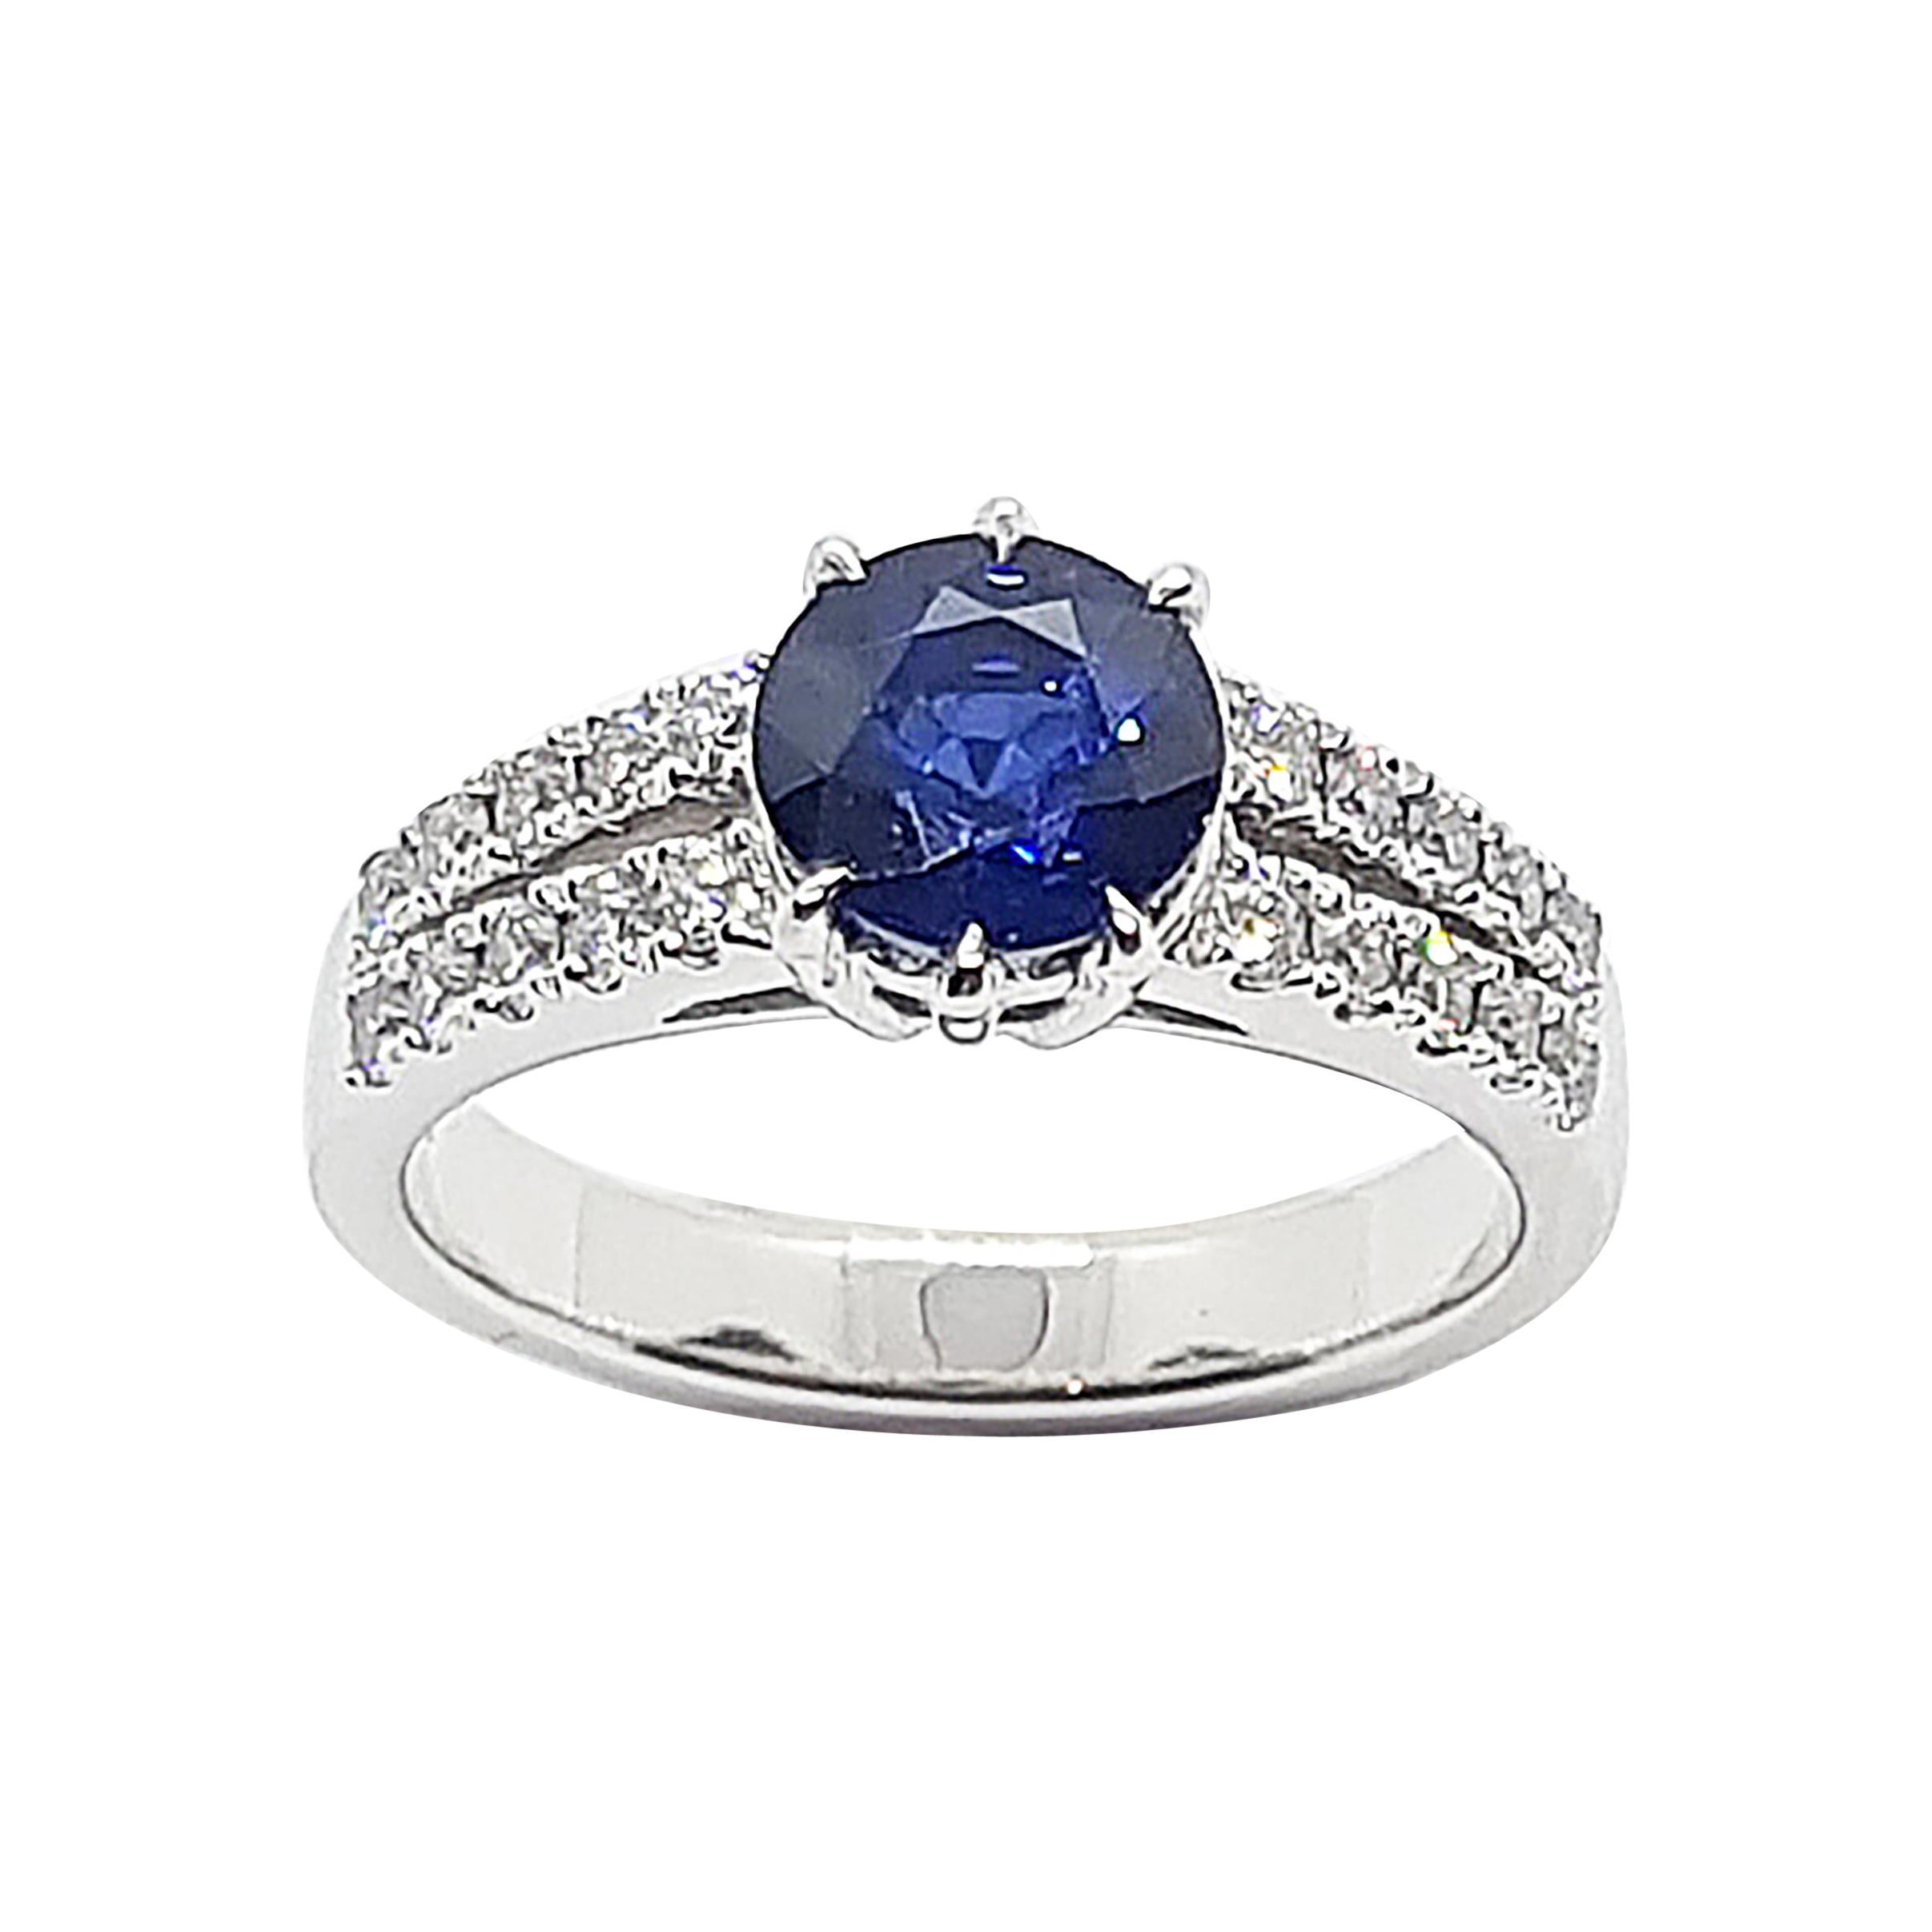 Round Blue Sapphire with Diamond Ring Set in Platinum 950 Settings For Sale